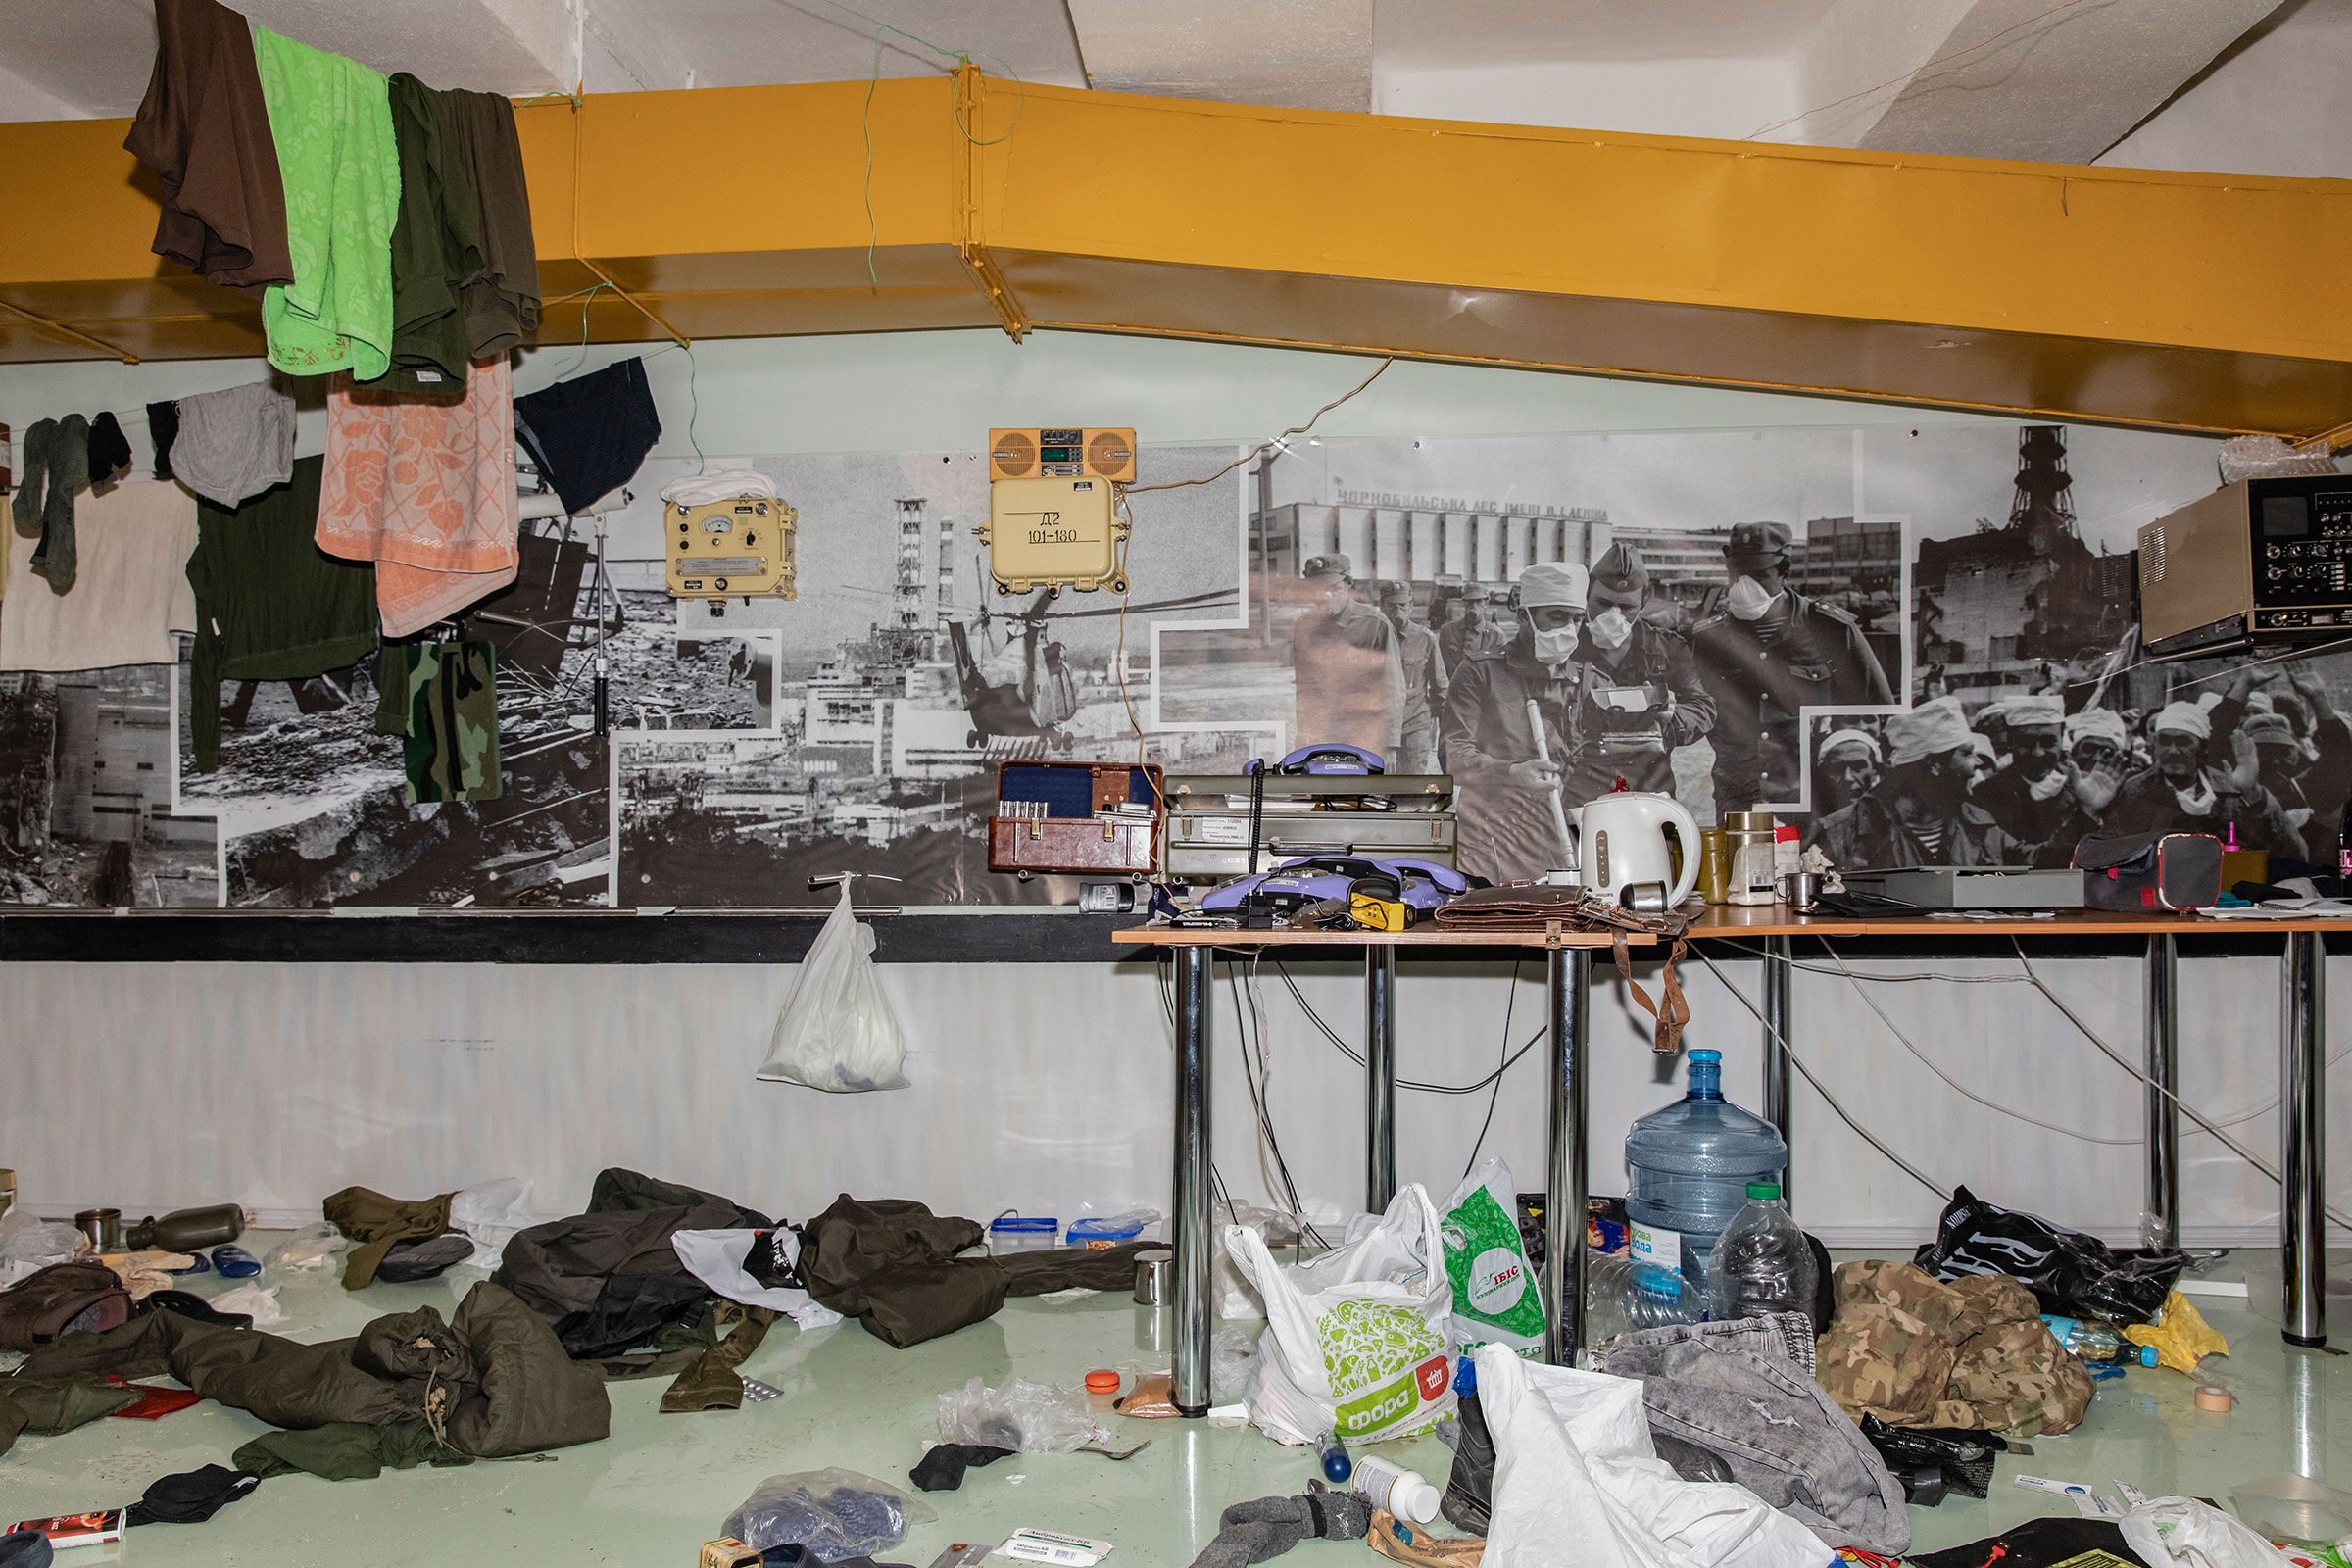 General view of a room in an administrative building in the Chernobyl nuclear power plant, where Ukrainian National Guard servicemen were held as hostages since the start of Russian invasion, on April 8. (Mikhail Palinchak—EPA-EFE/Shutterstock)